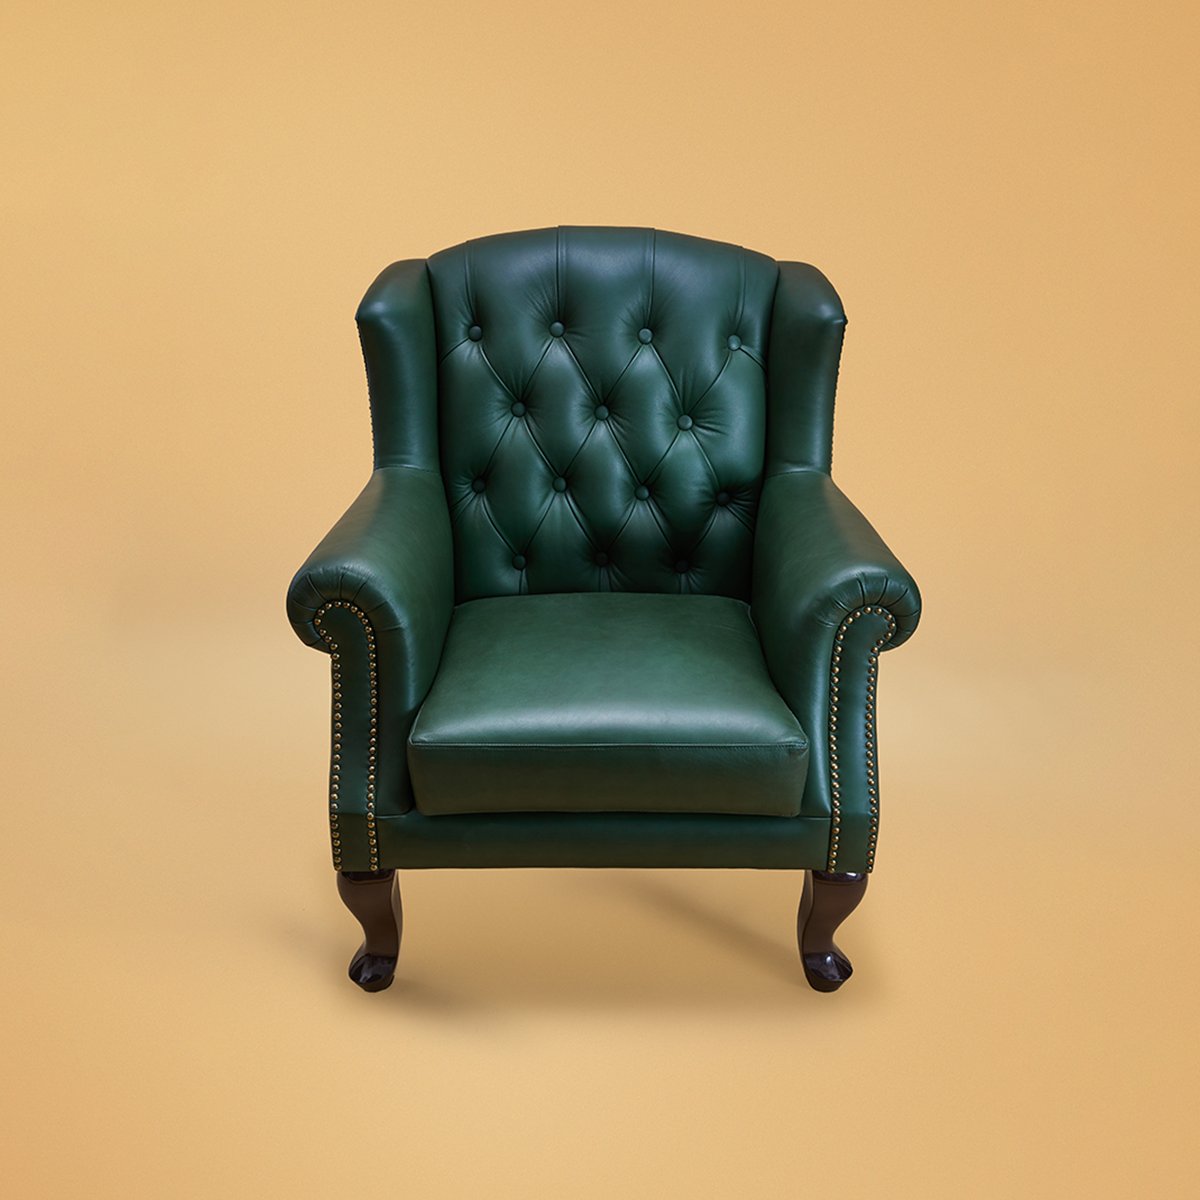 Genuine Leather Chesterfield Wing Chair In Green Colour